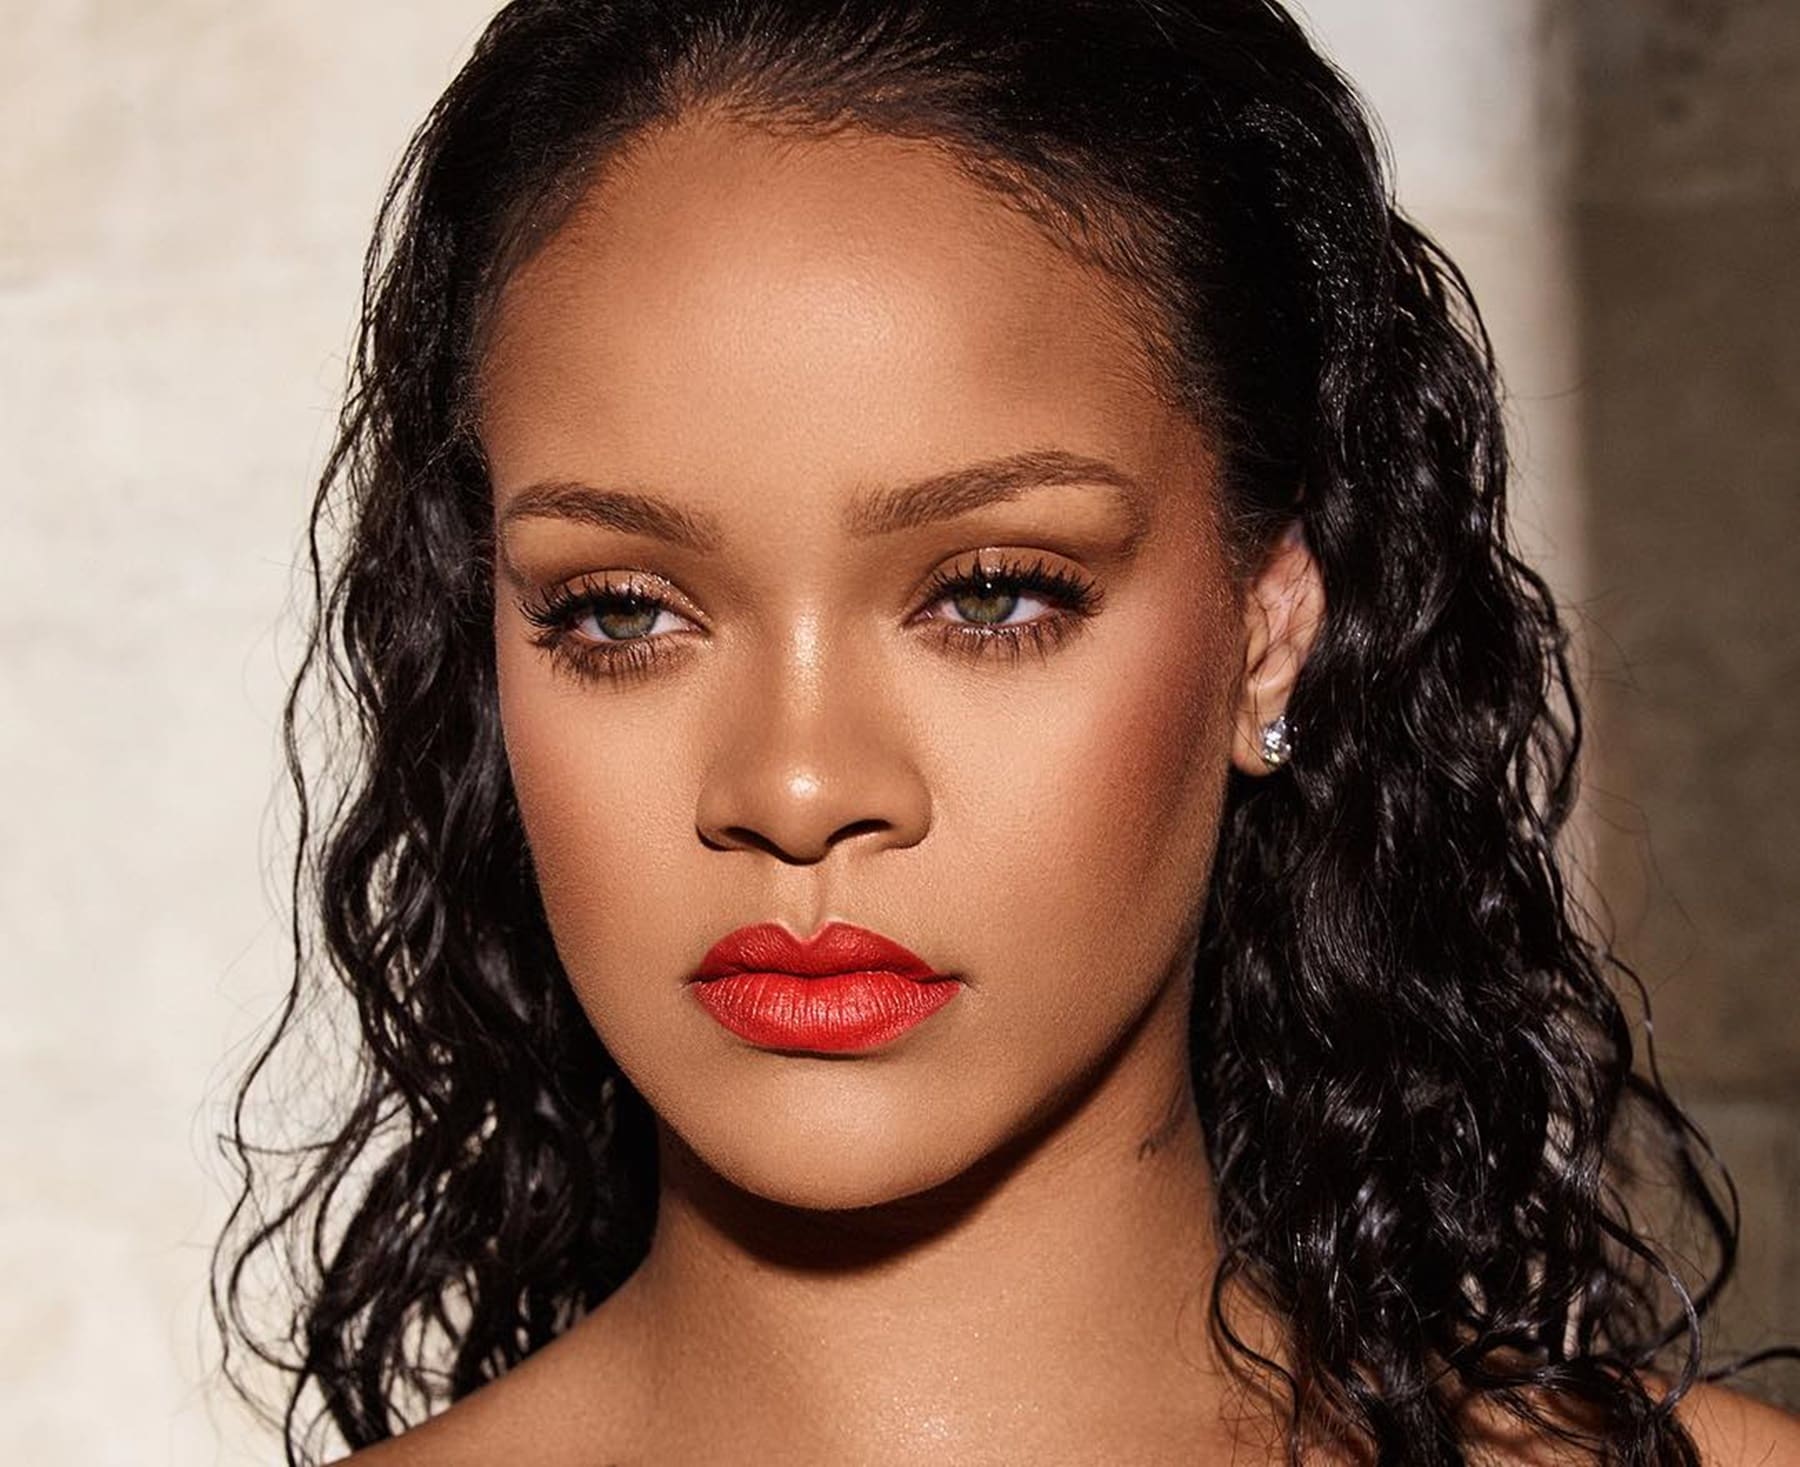 Rihanna Leaves Little To The Imagination In Sizzling New Photos Promoting Lingerie ...